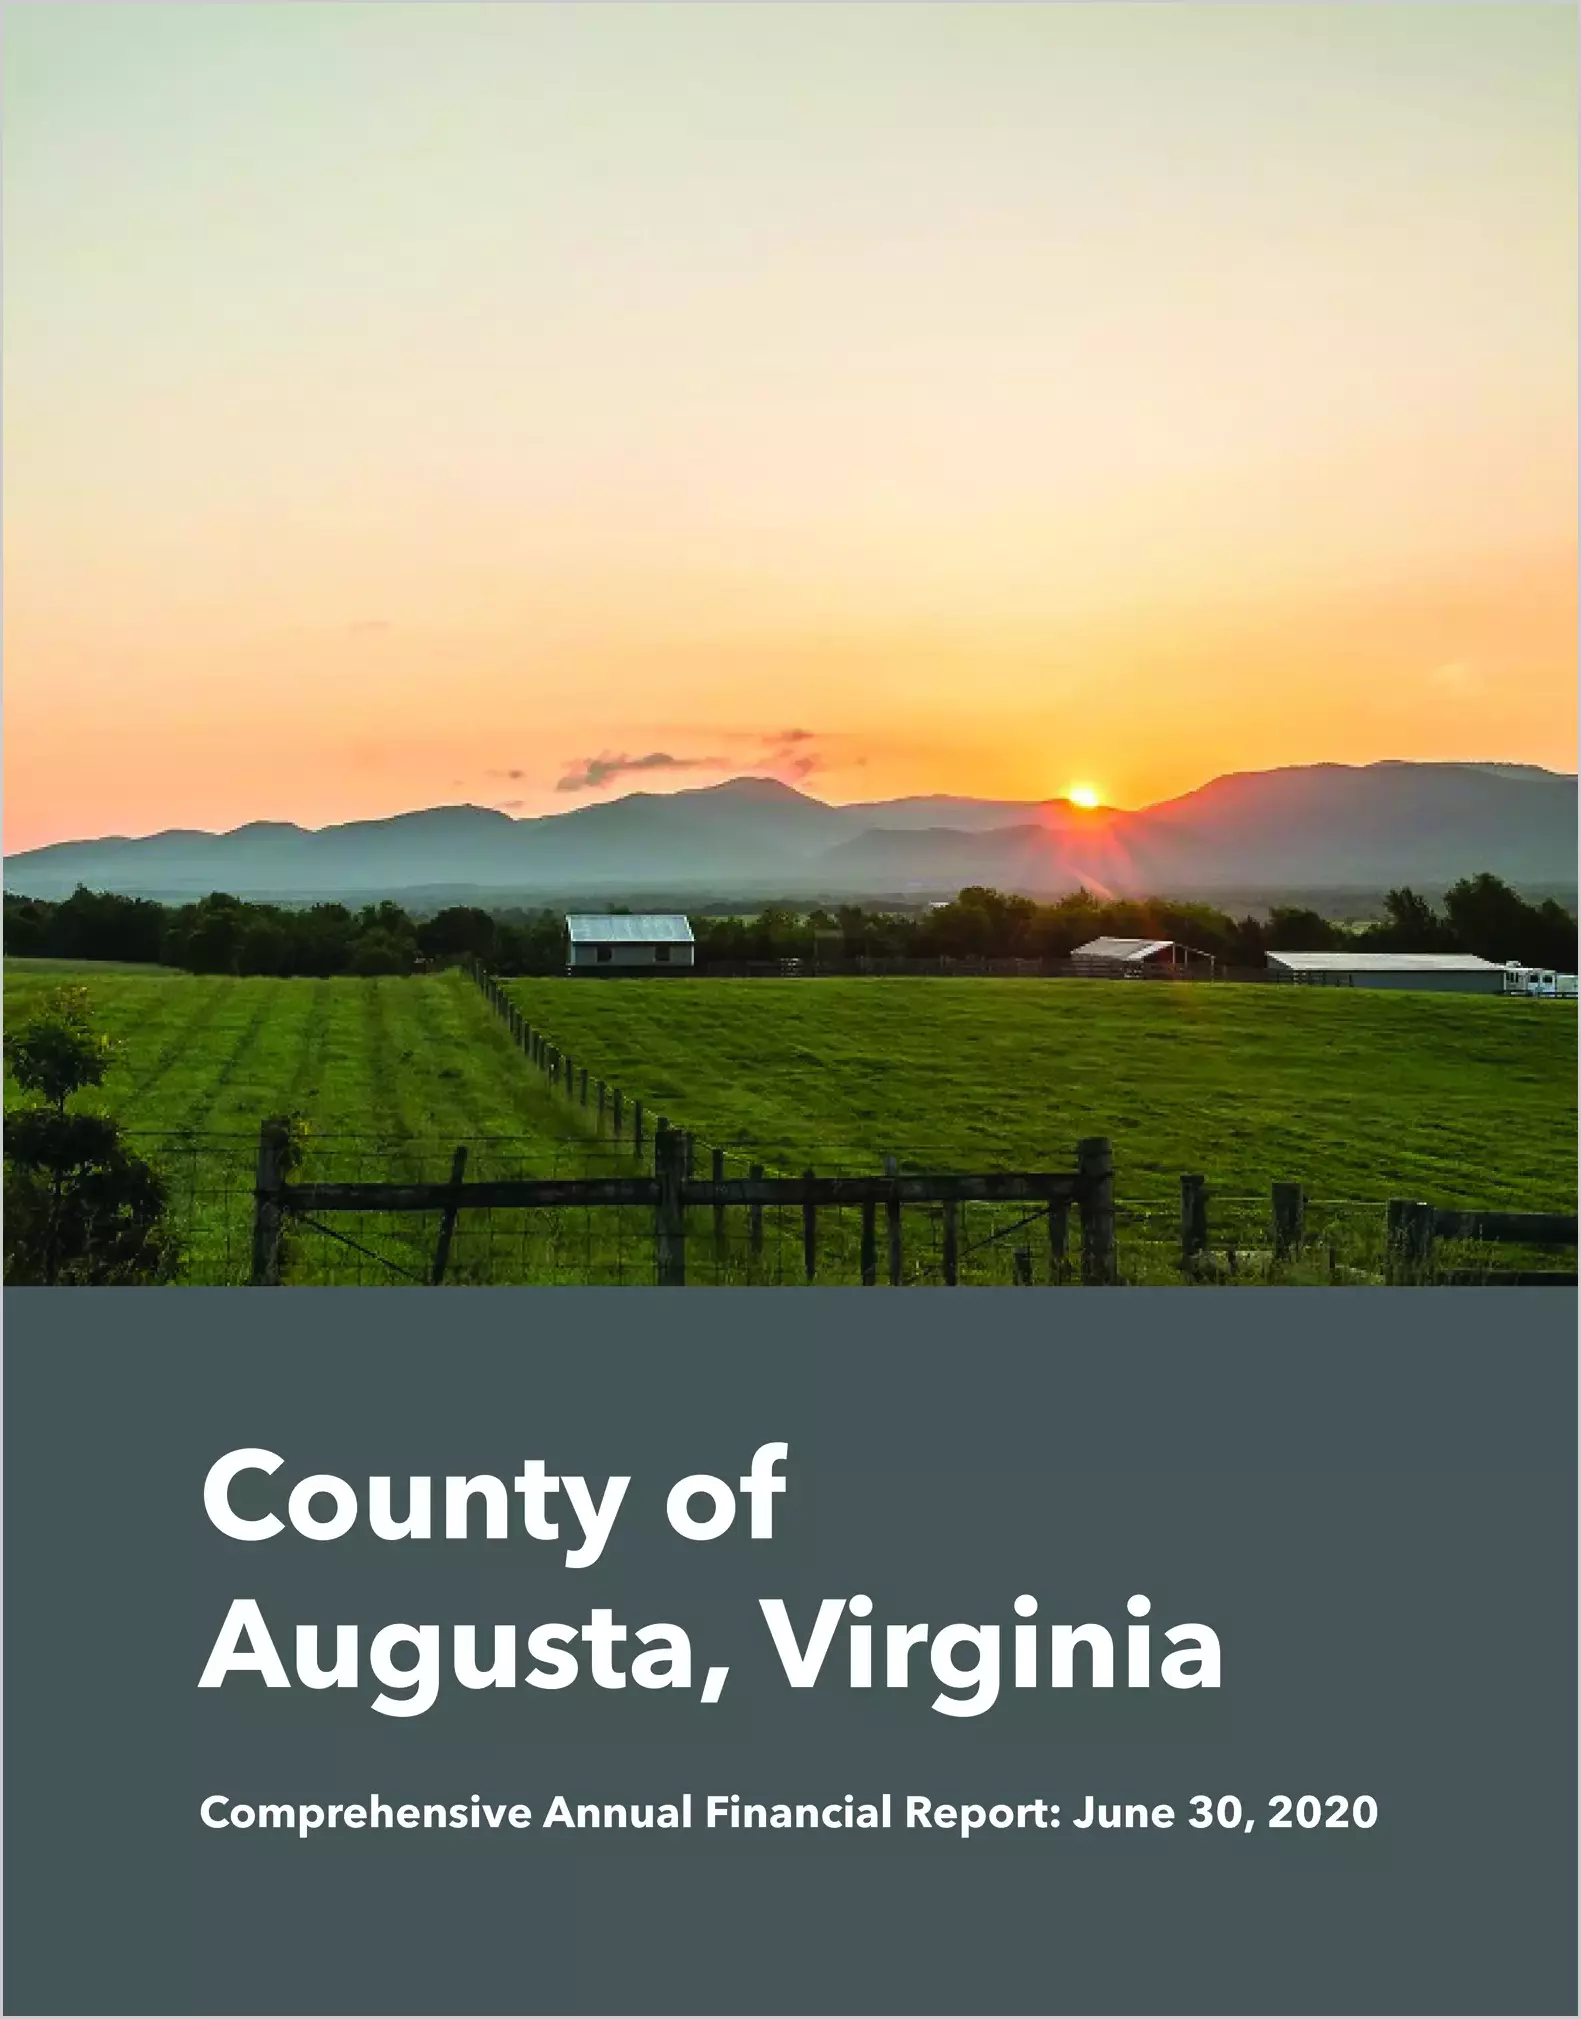 2020 Annual Financial Report for County of Augusta